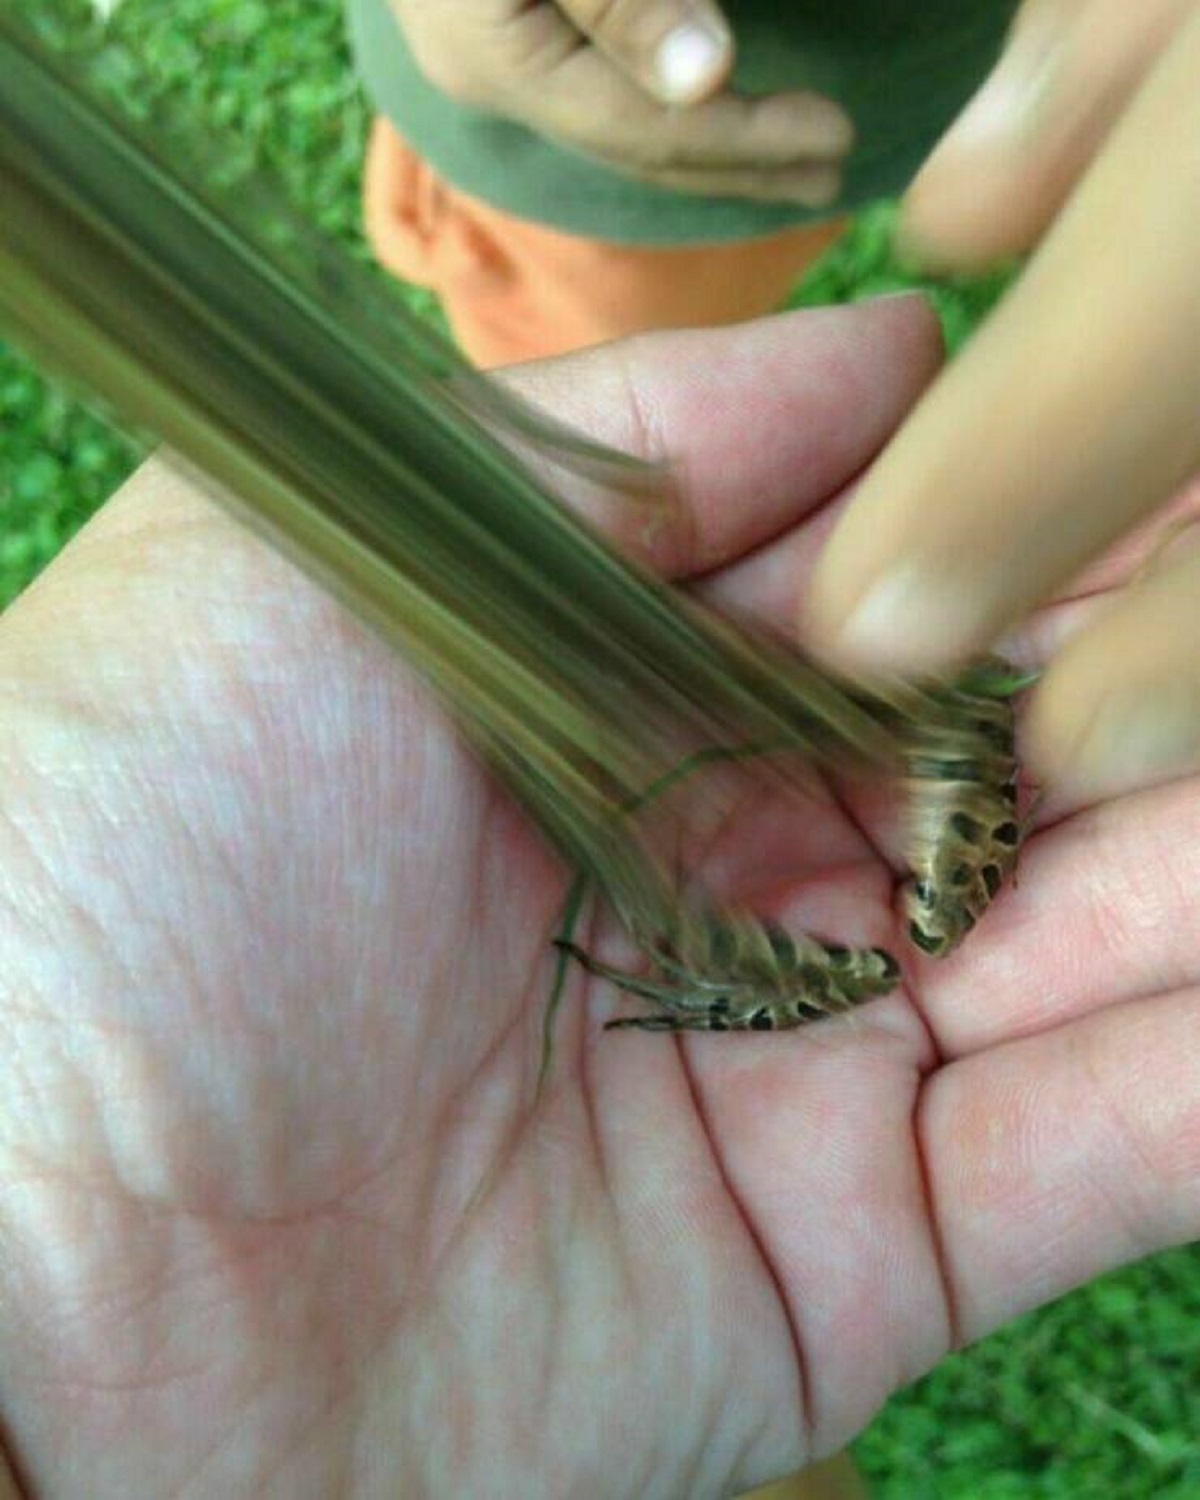 "Someone Captured The Exact Moment This Frog Jumped Out Of Frame"